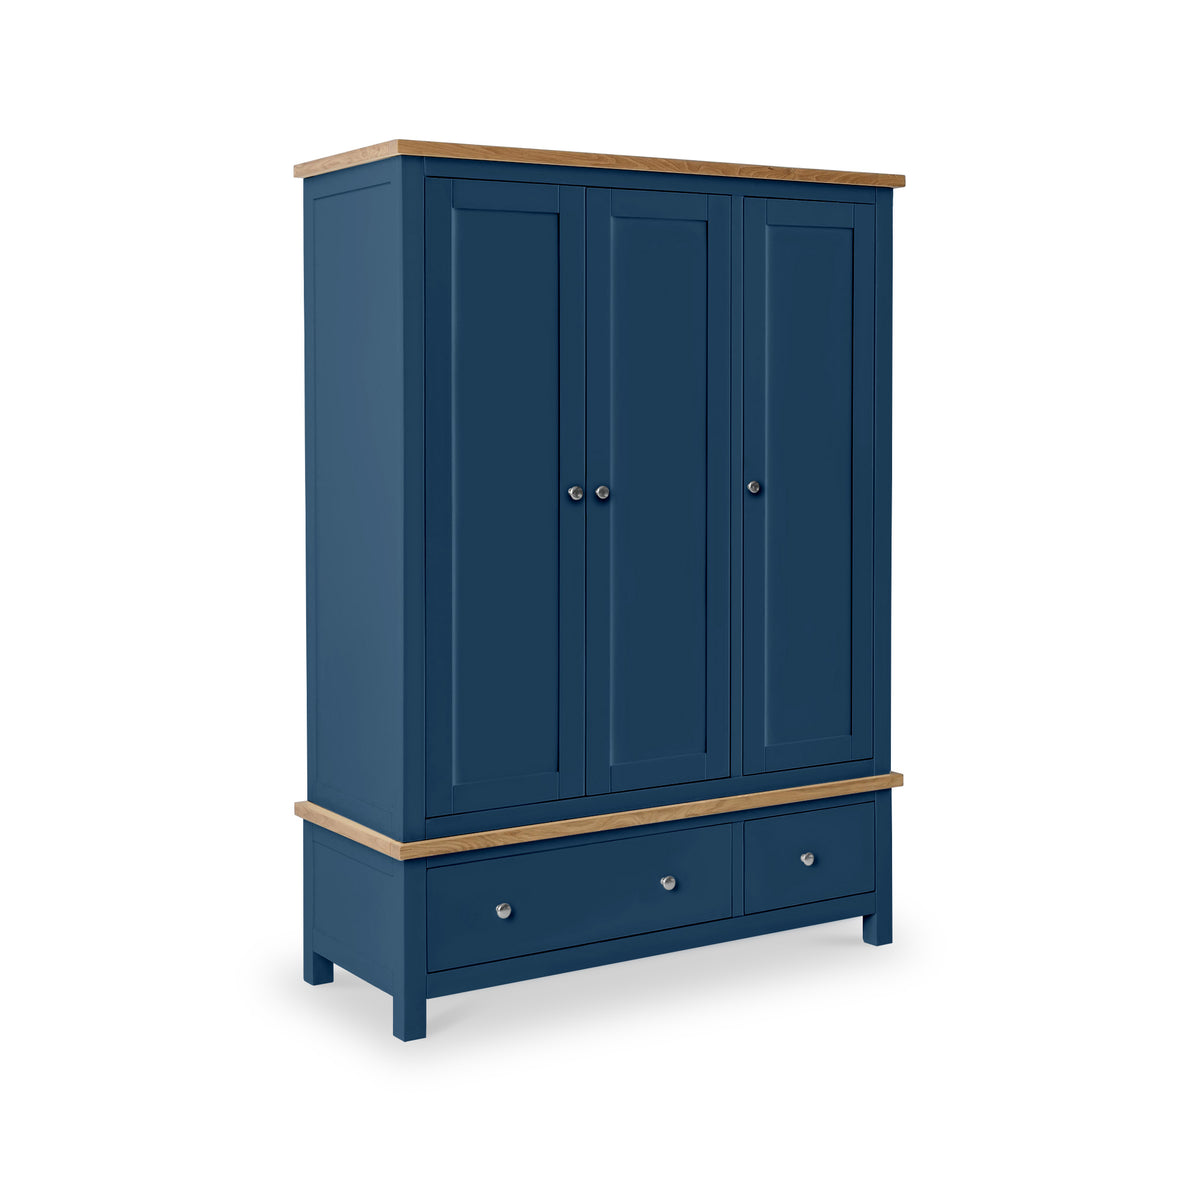 Farrow Navy Blue Triple Wardrobe with Storage Drawers from Roseland Furniture